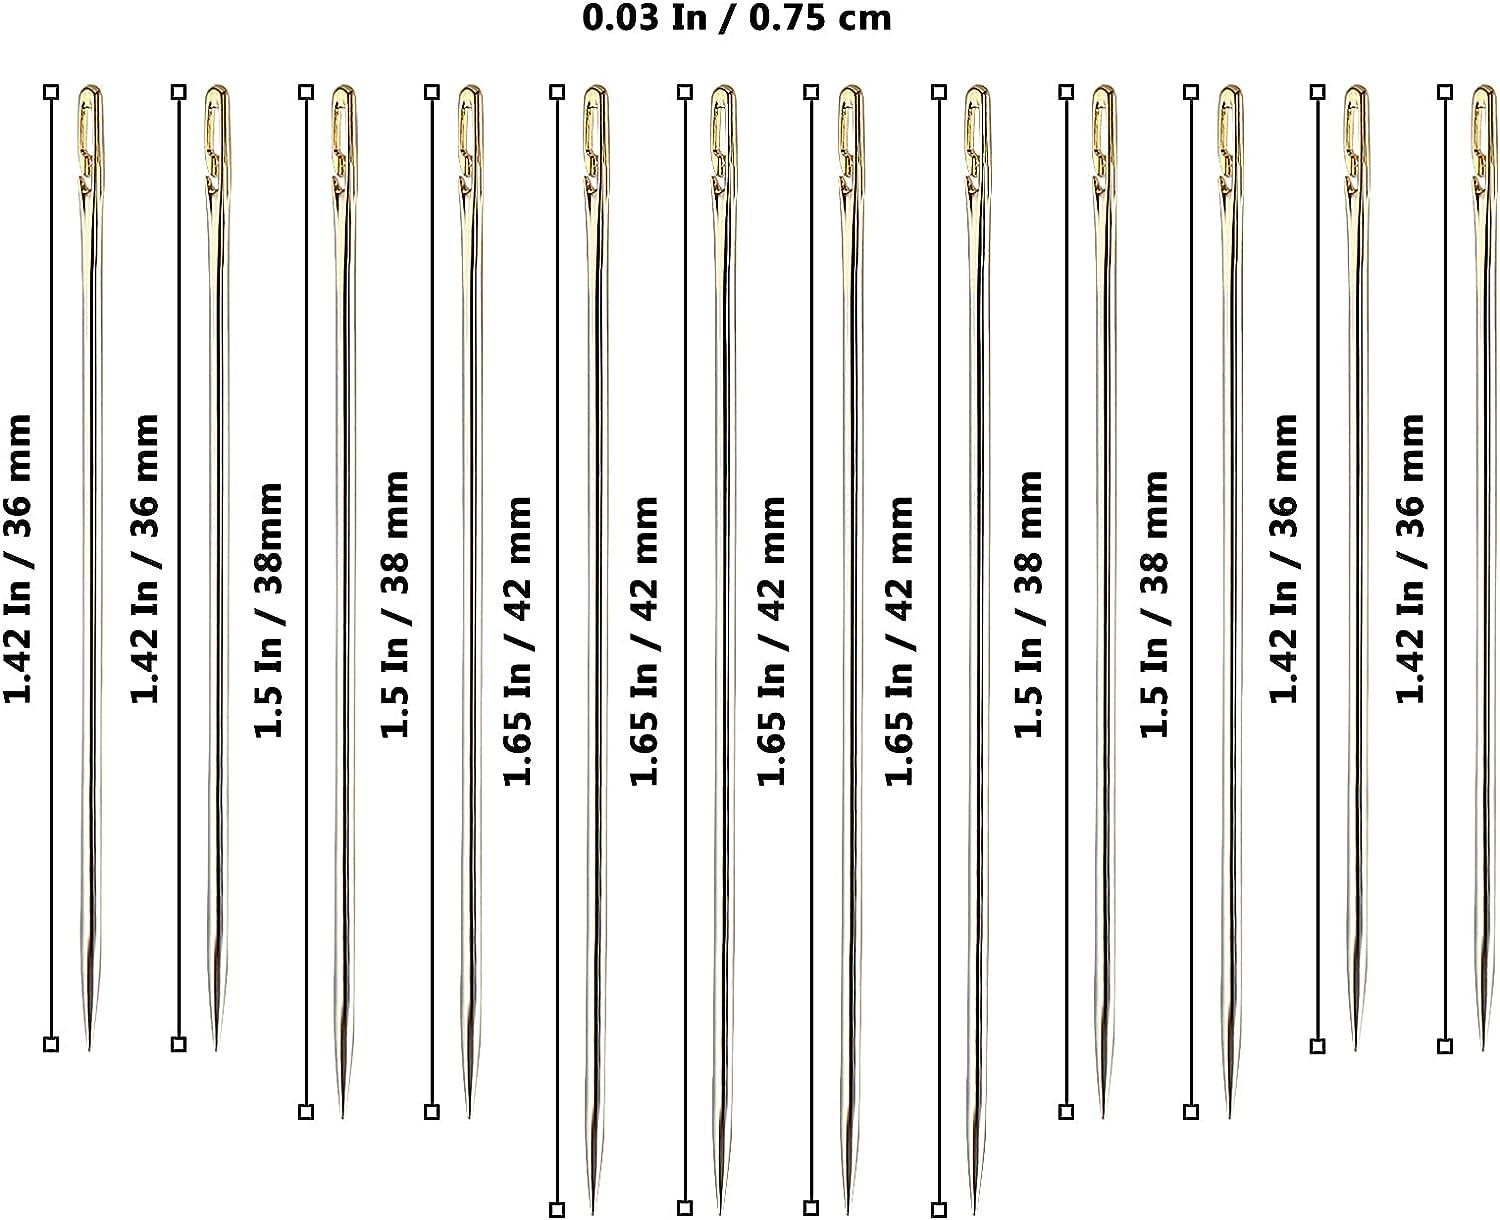 MUKLEI 48 Pack Self-Threading Needles, 3 Sizes Stainless Steel Sewing  Needles, Side Threading Needles for Hand Sewing, Hand Stitching Needles for  Embroidery, DIY, Mending, 1.65Inch, 1.5Inch, 1.42Inch